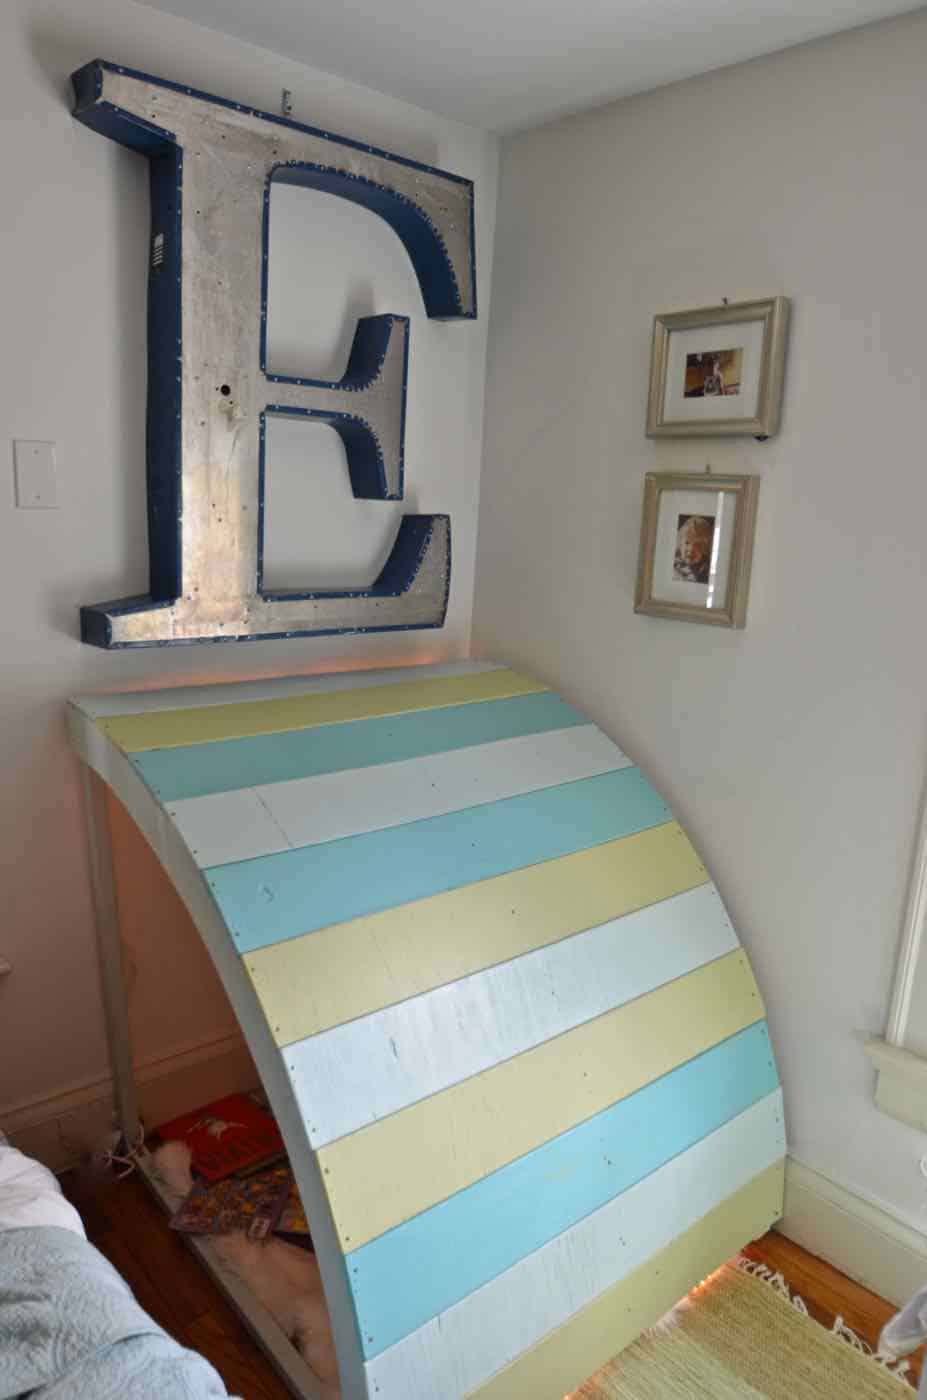 Simple and inexpensive corner reading nook using plywood and paint.